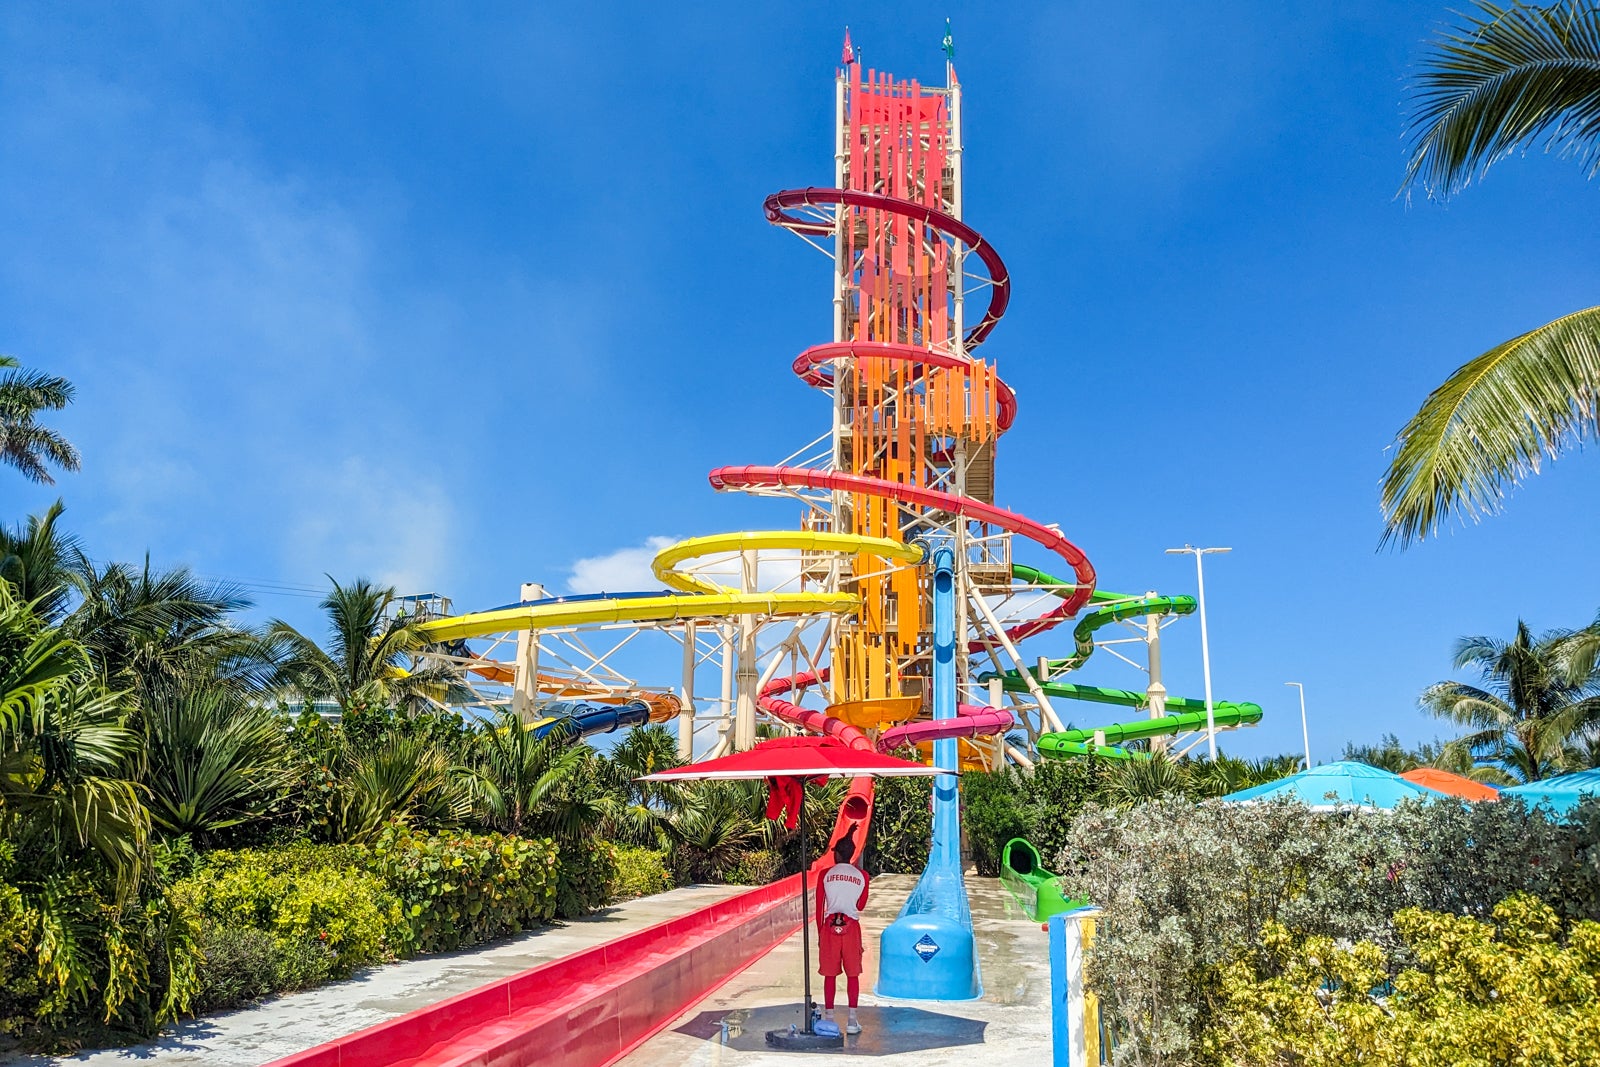 Multicolored water slide tower set amid blue sky and palm trees